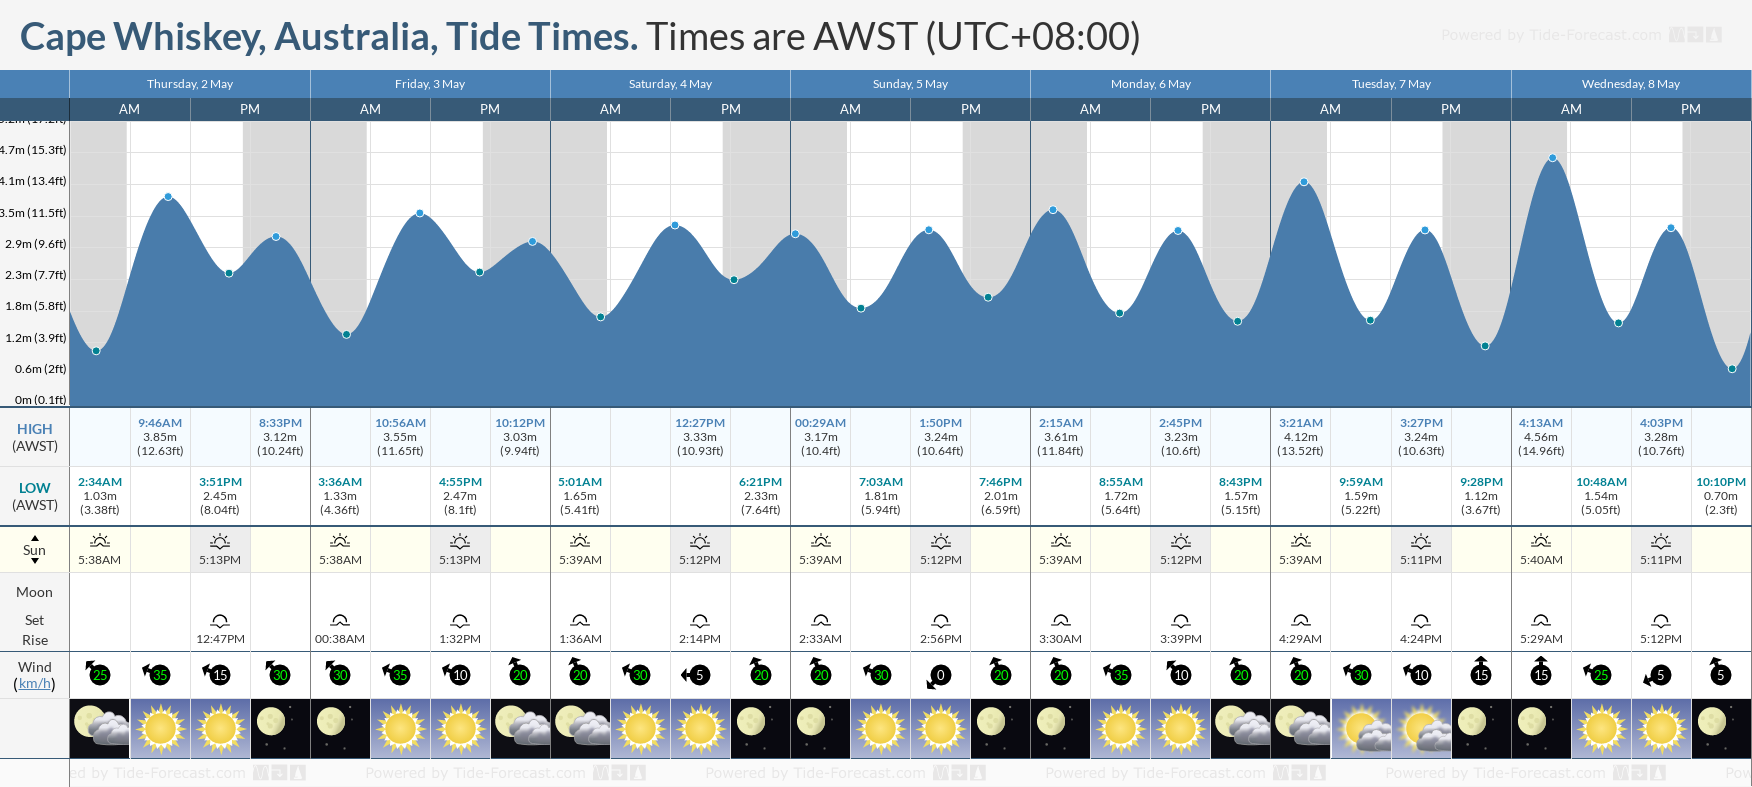 Cape Whiskey, Australia Tide Chart including high and low tide tide times for the next 7 days